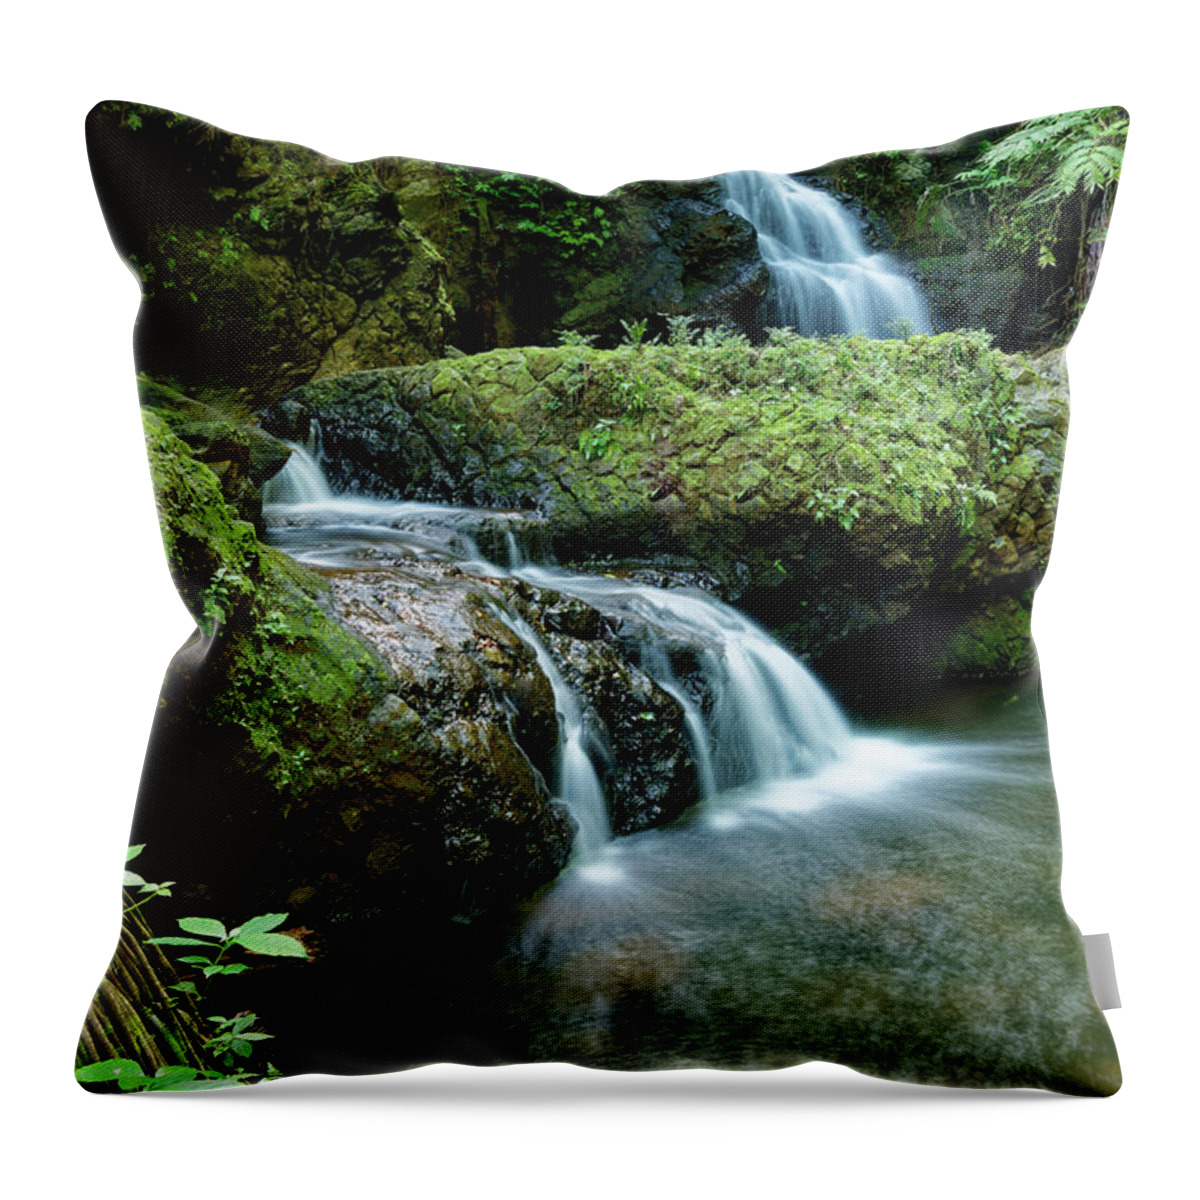 Beautiful Falls Throw Pillow featuring the photograph Onomea Falls by Heidi Fickinger